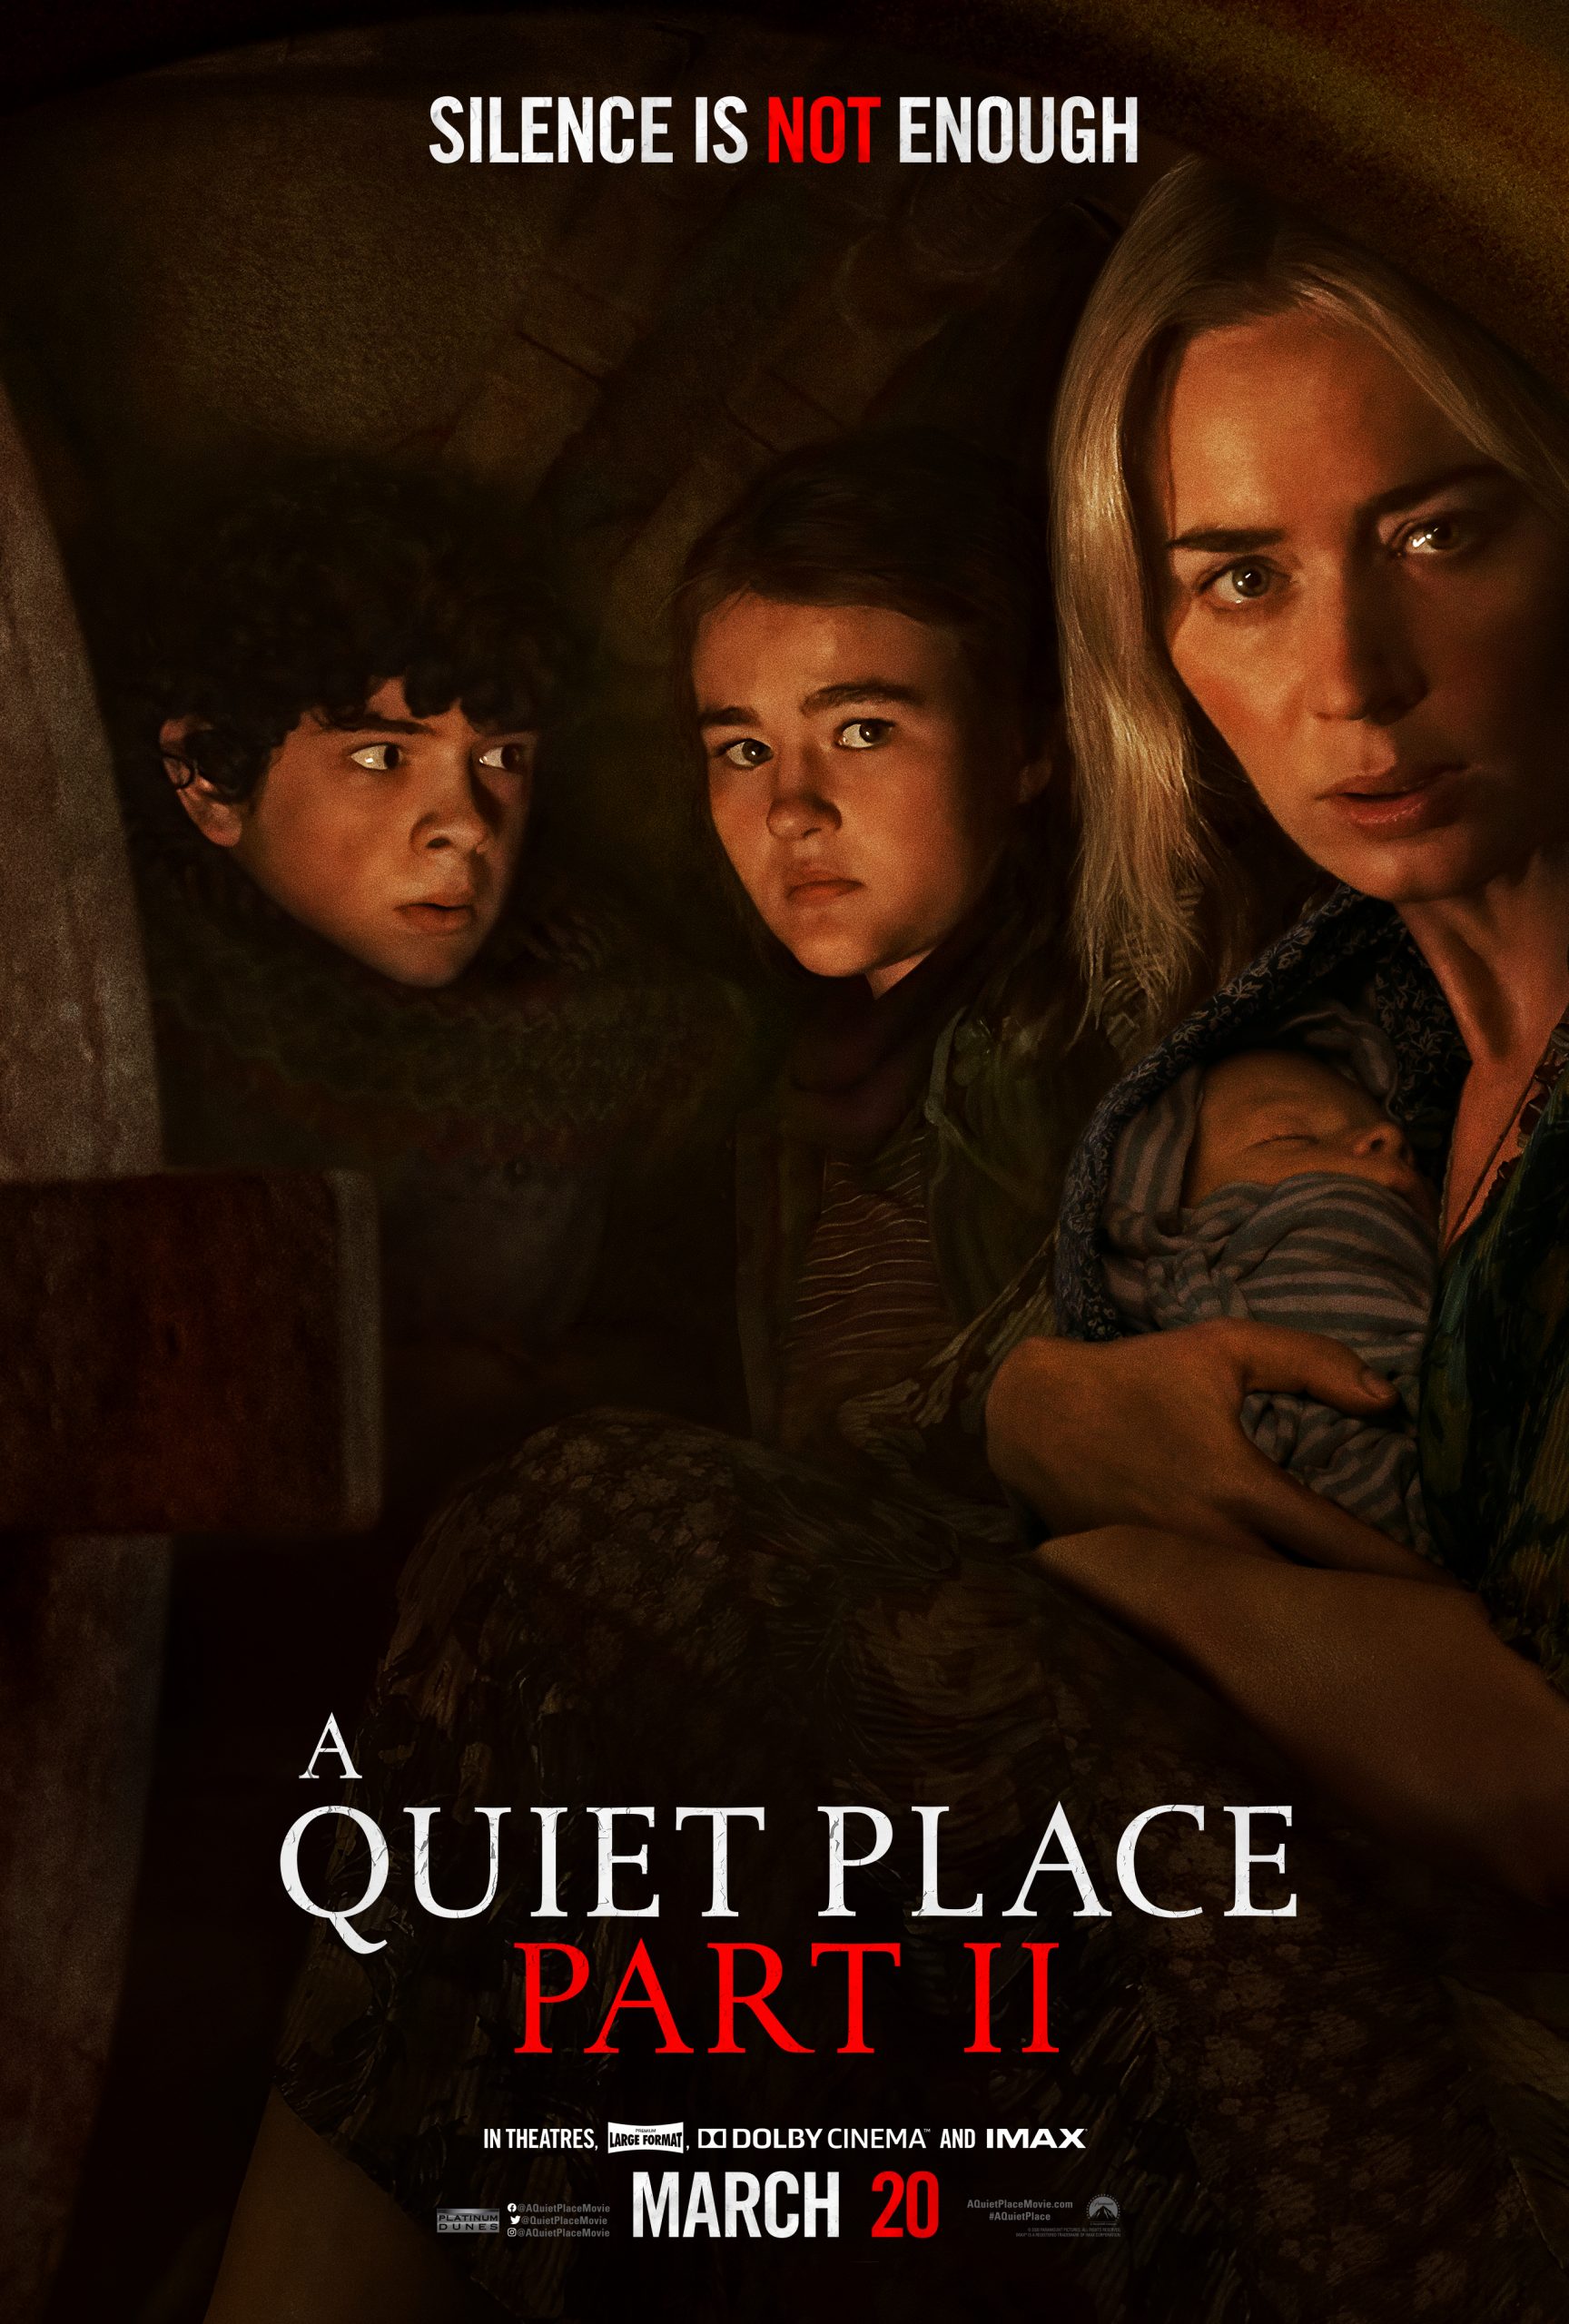 New Movie: A Quiet Place II Starring Emily Blunt